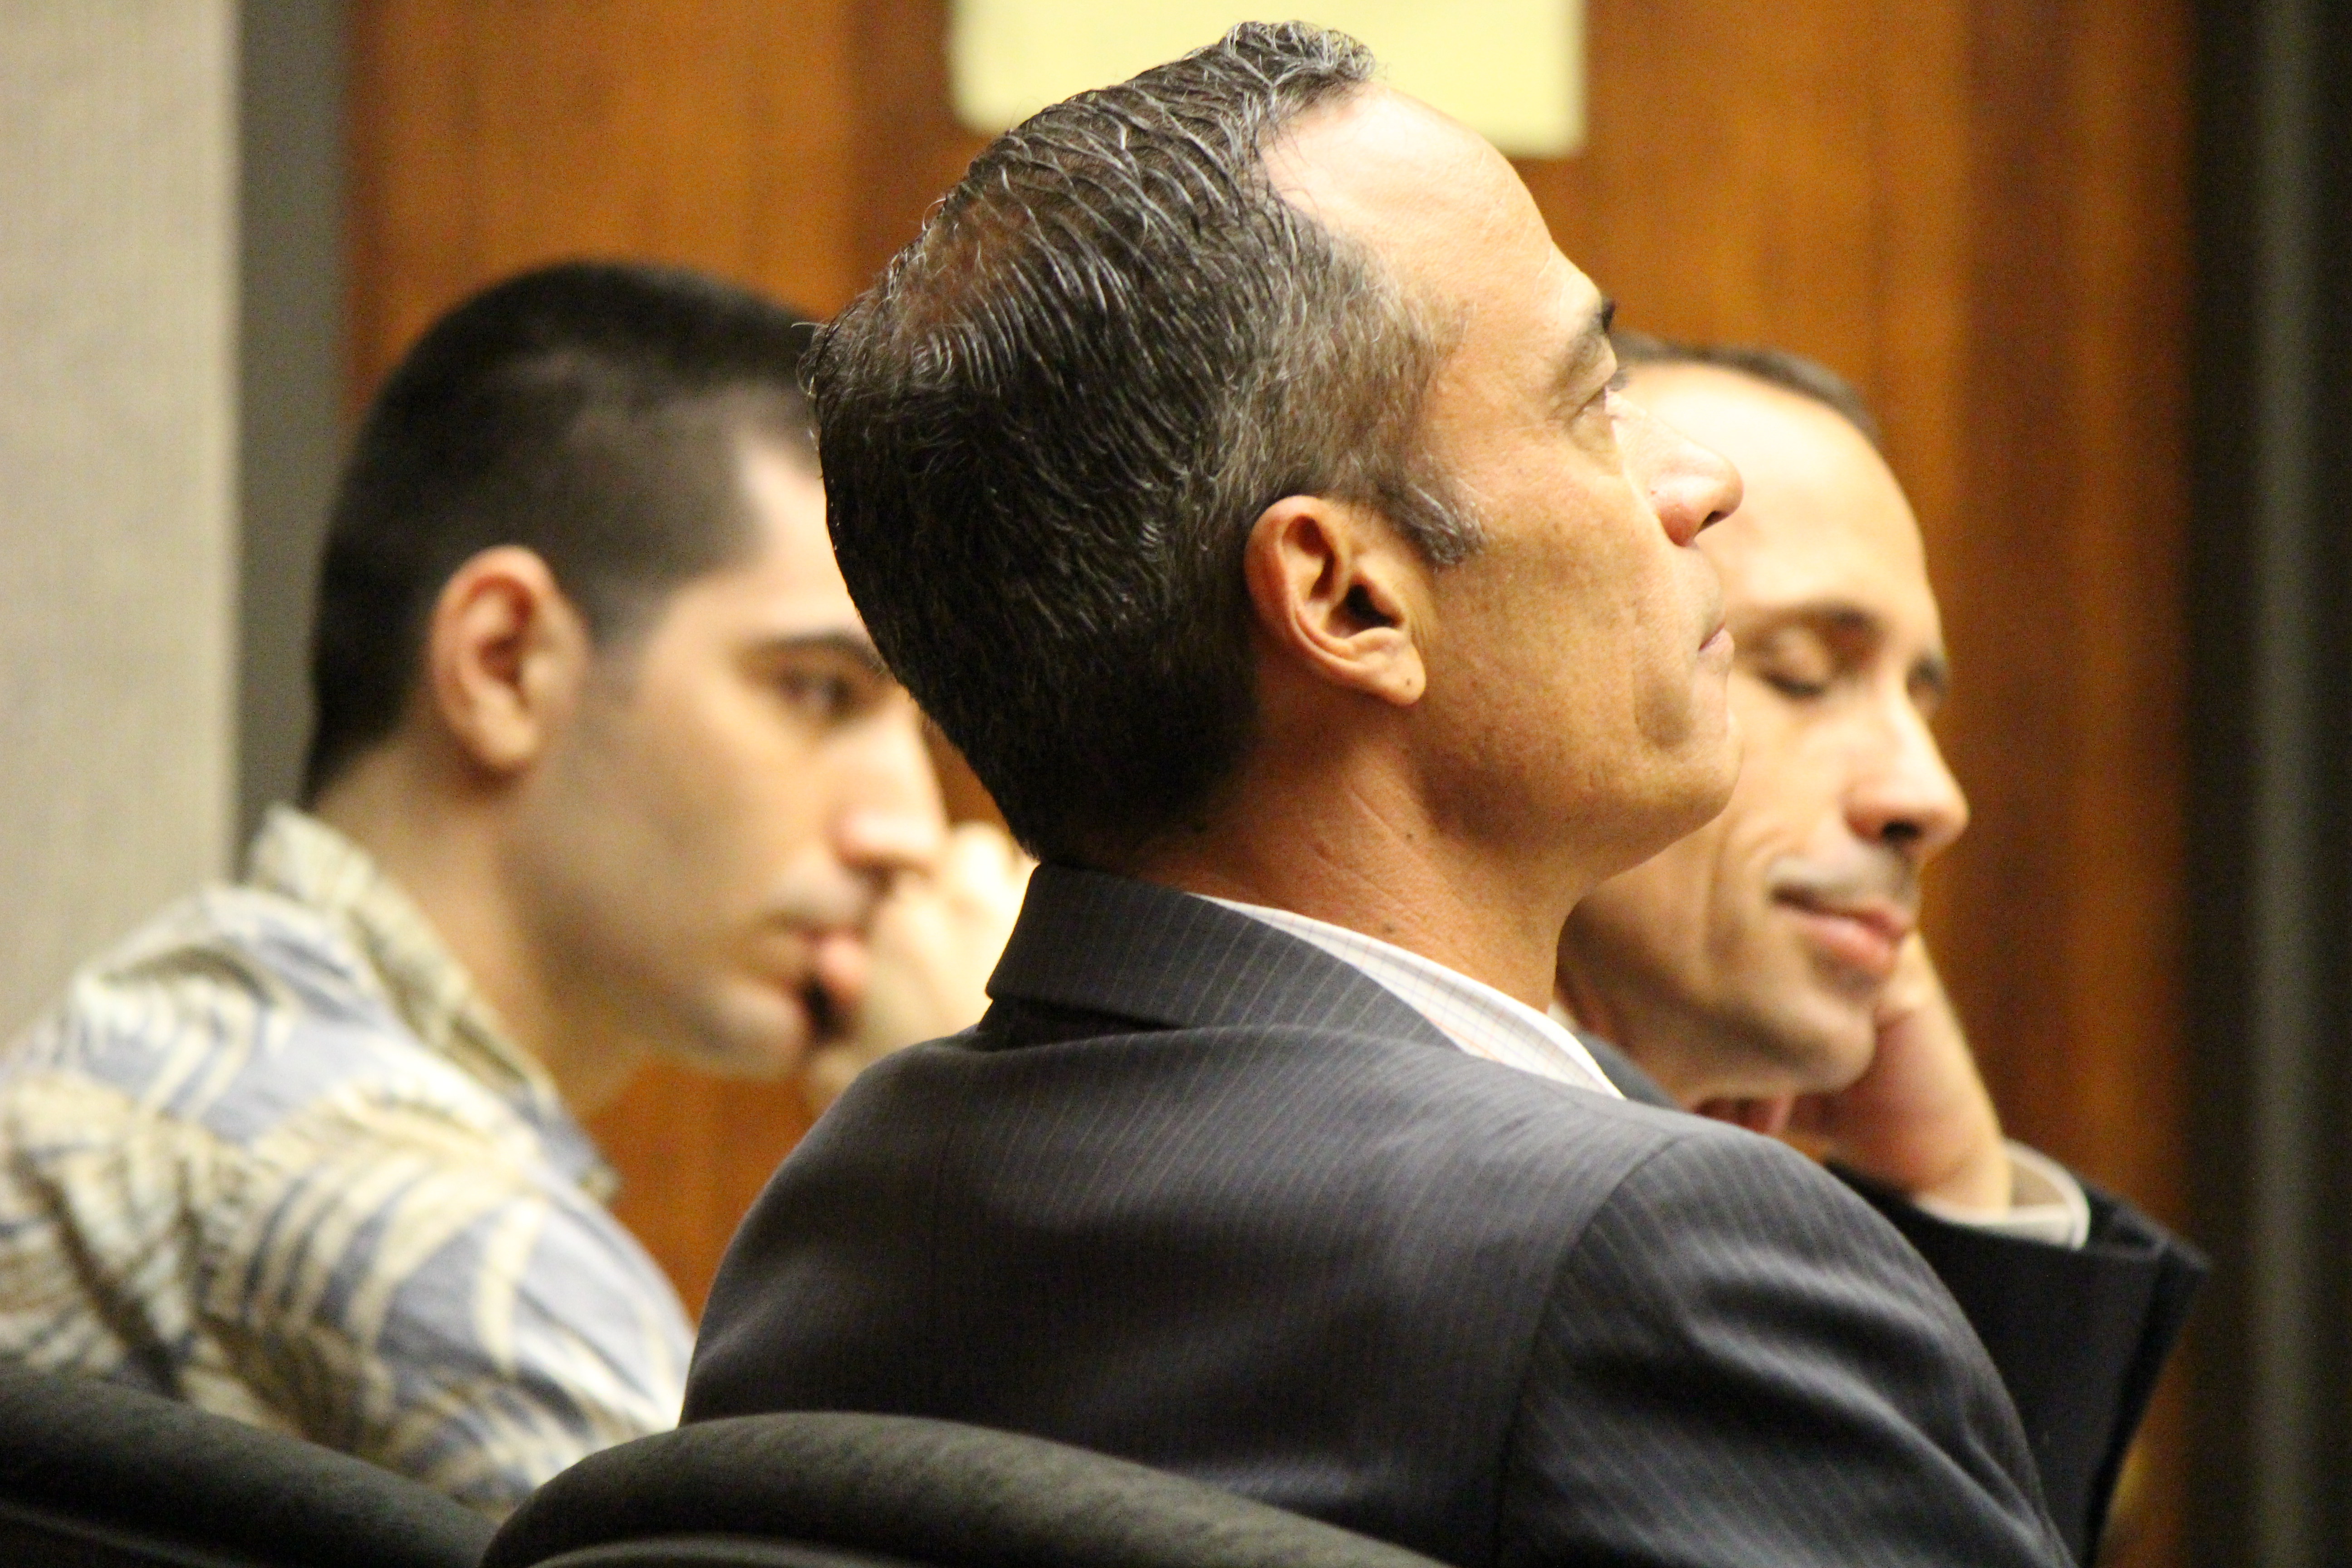 State v Capobianco trail. Defense Attorney Jon Apo in foreground (right) with fellow defense attorney Matthew Nardi (left) and defendant Steven Capobianco (background middle) . PC: 12.01.16 by Wendy Osher.